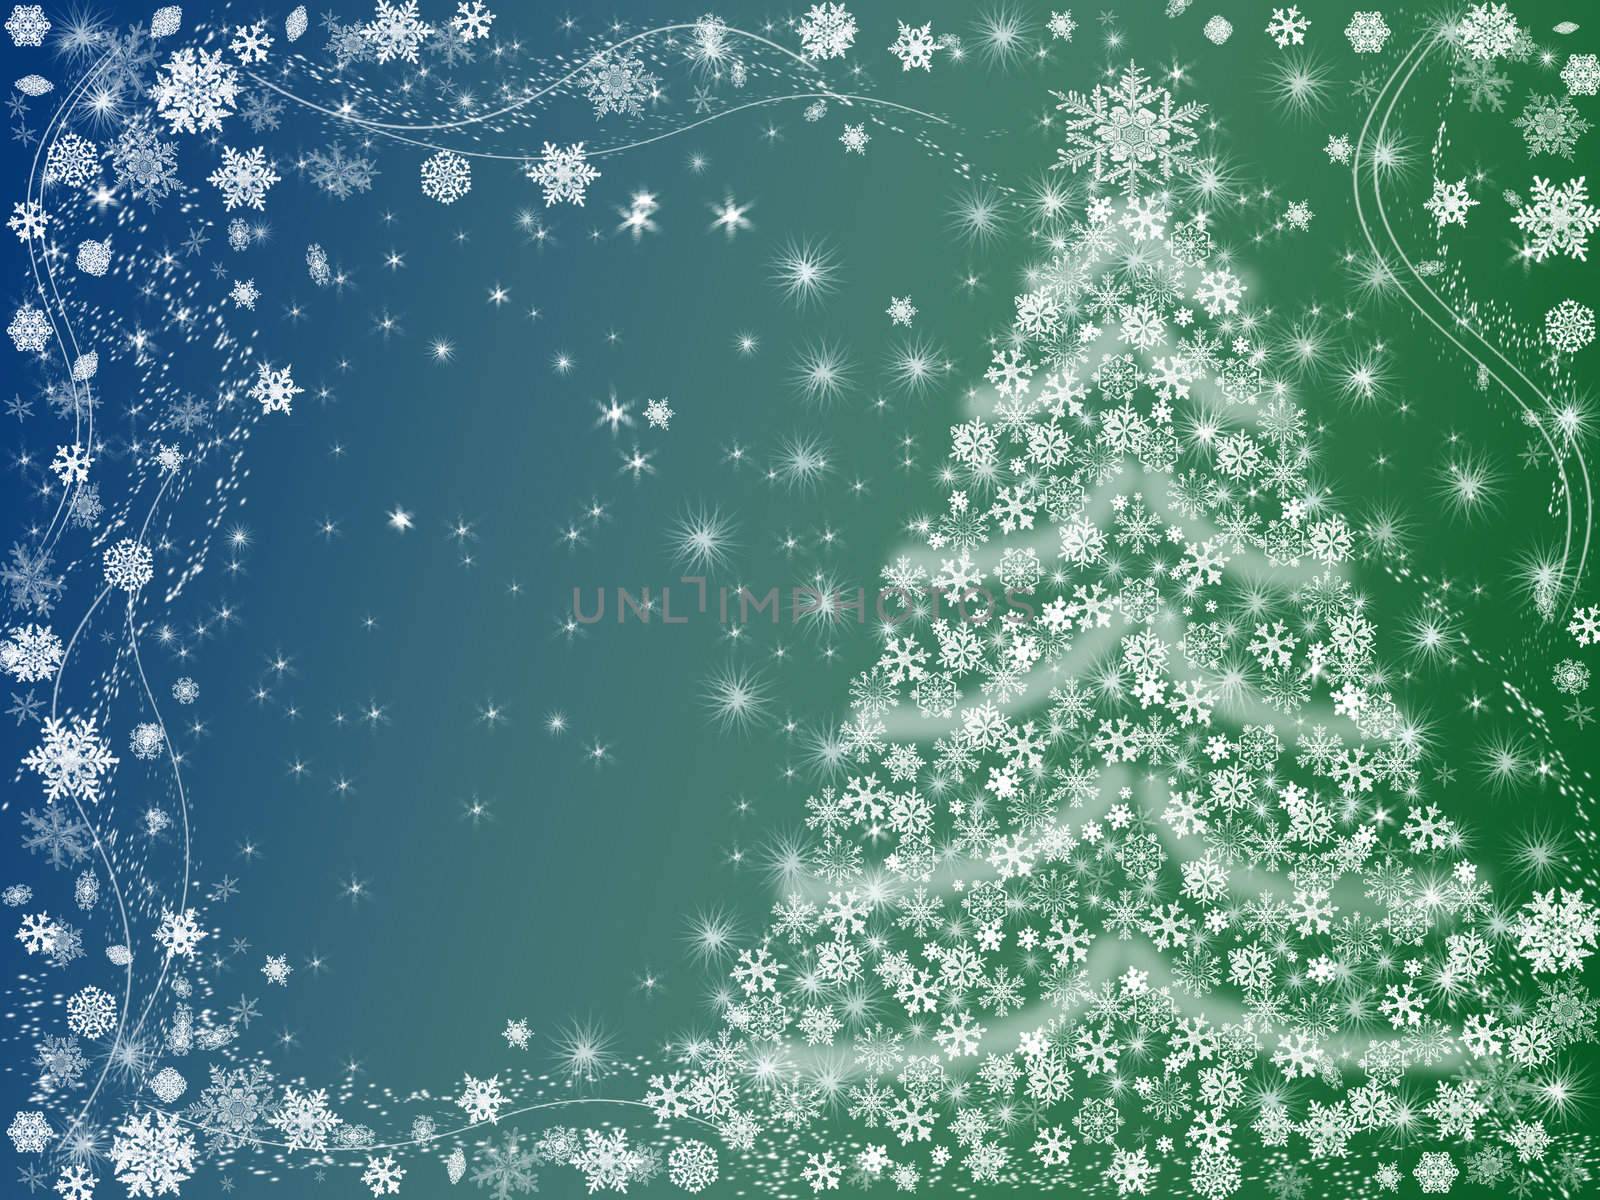 christmas tree drawn by white snowflakes over blue and green background 